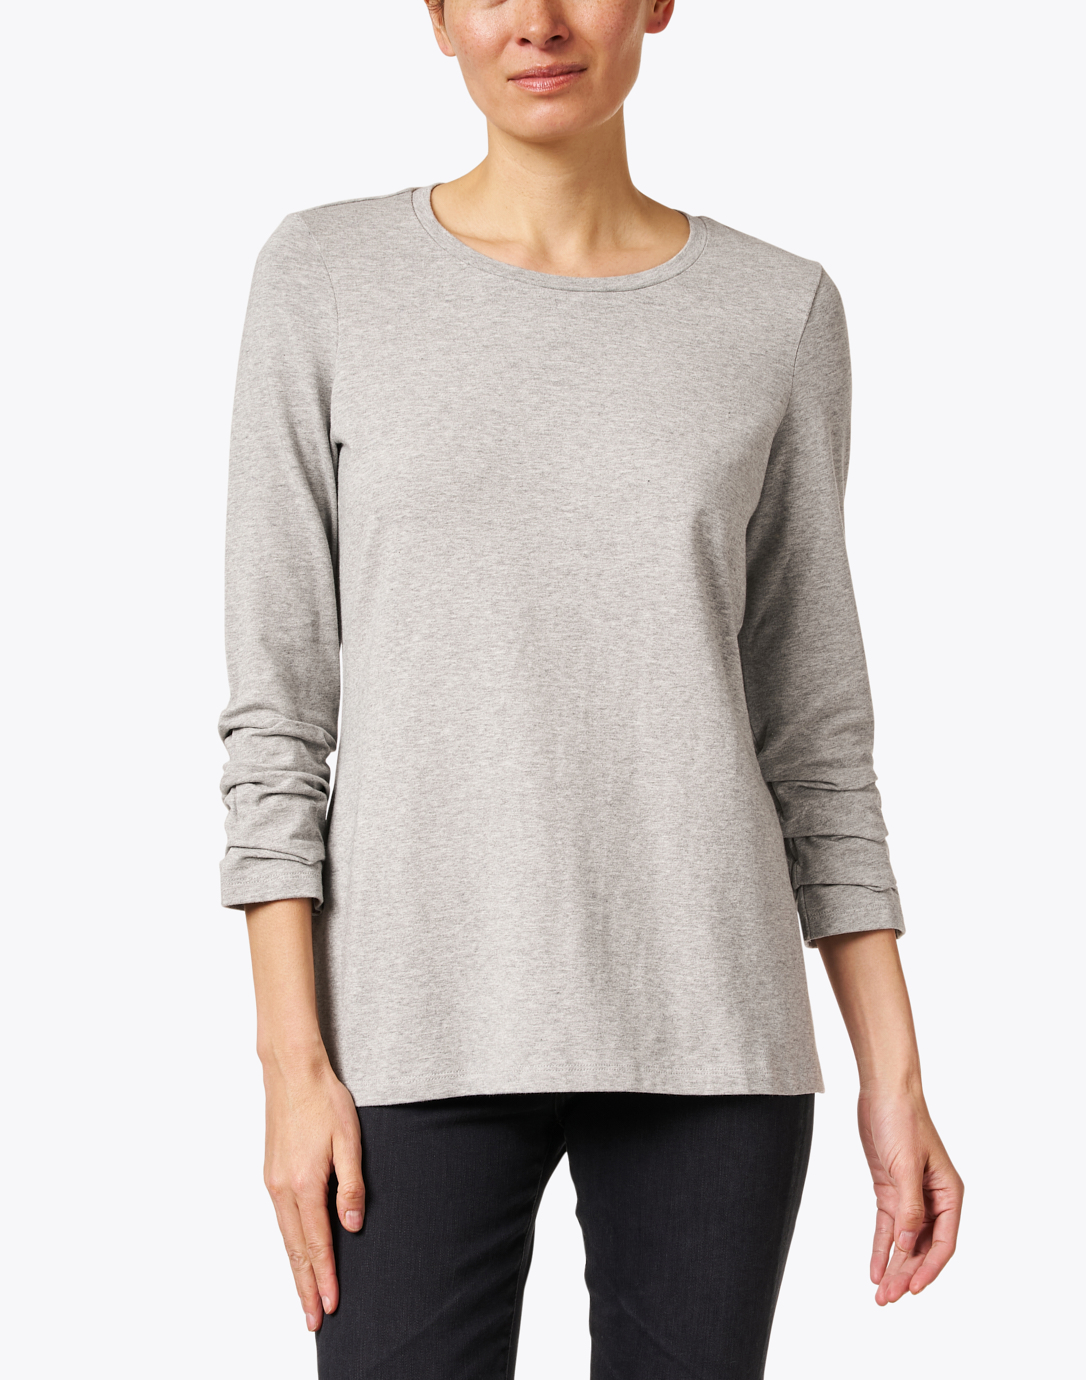 Ruched front long sleeve top heather grey